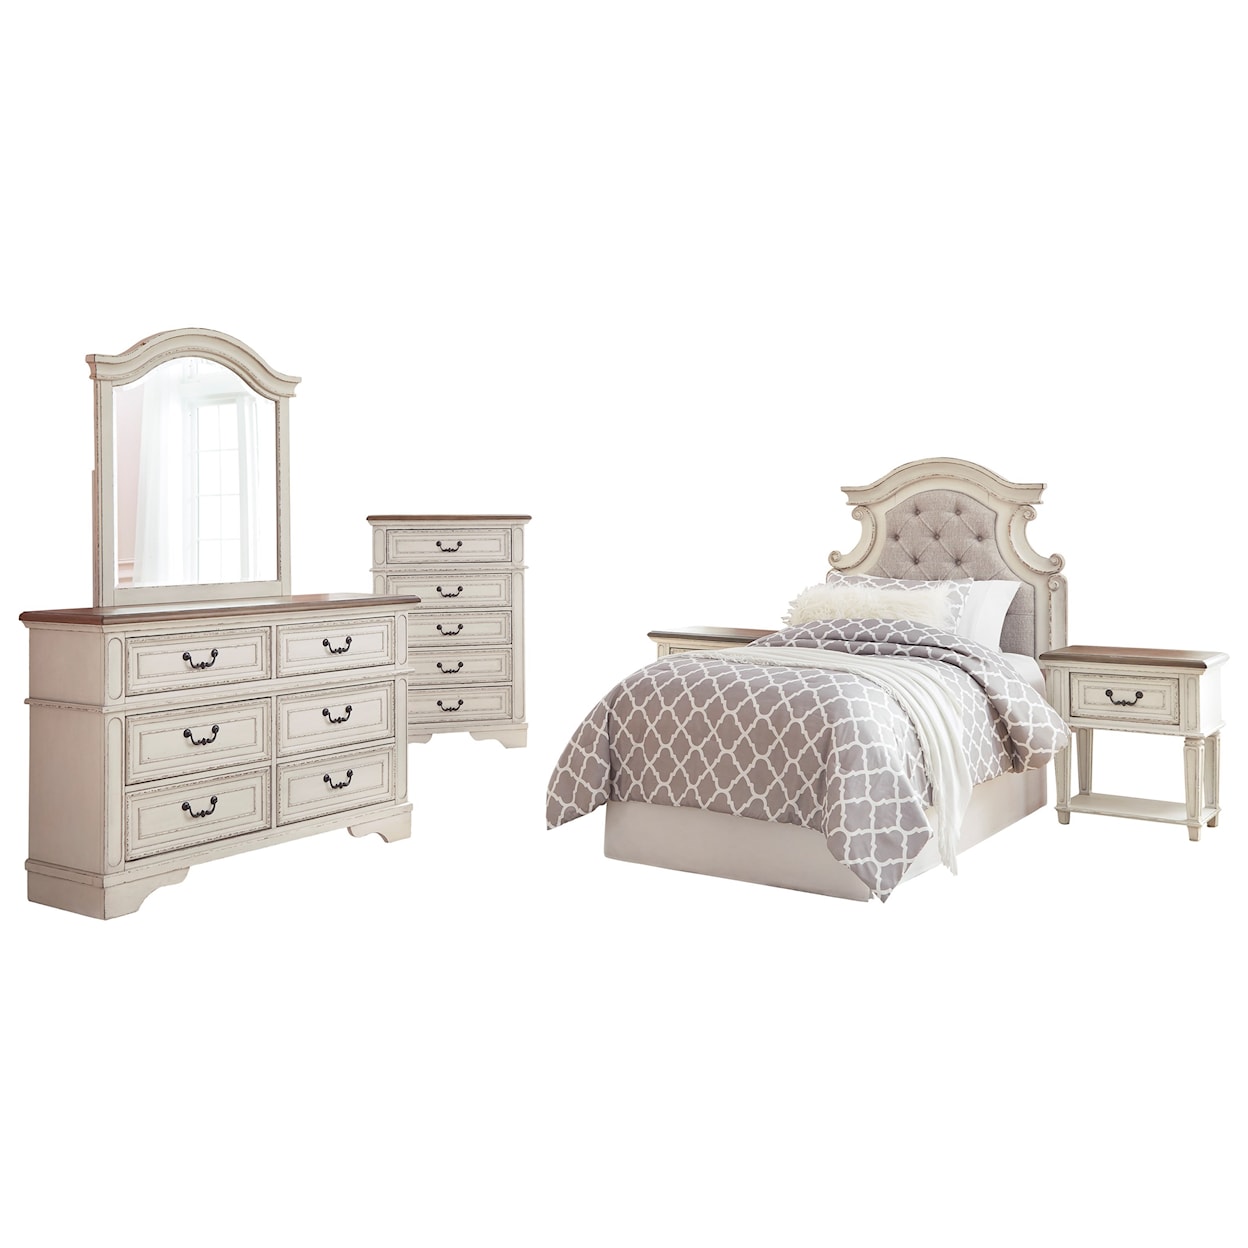 Ashley Signature Design Realyn Twin Bedroom Group